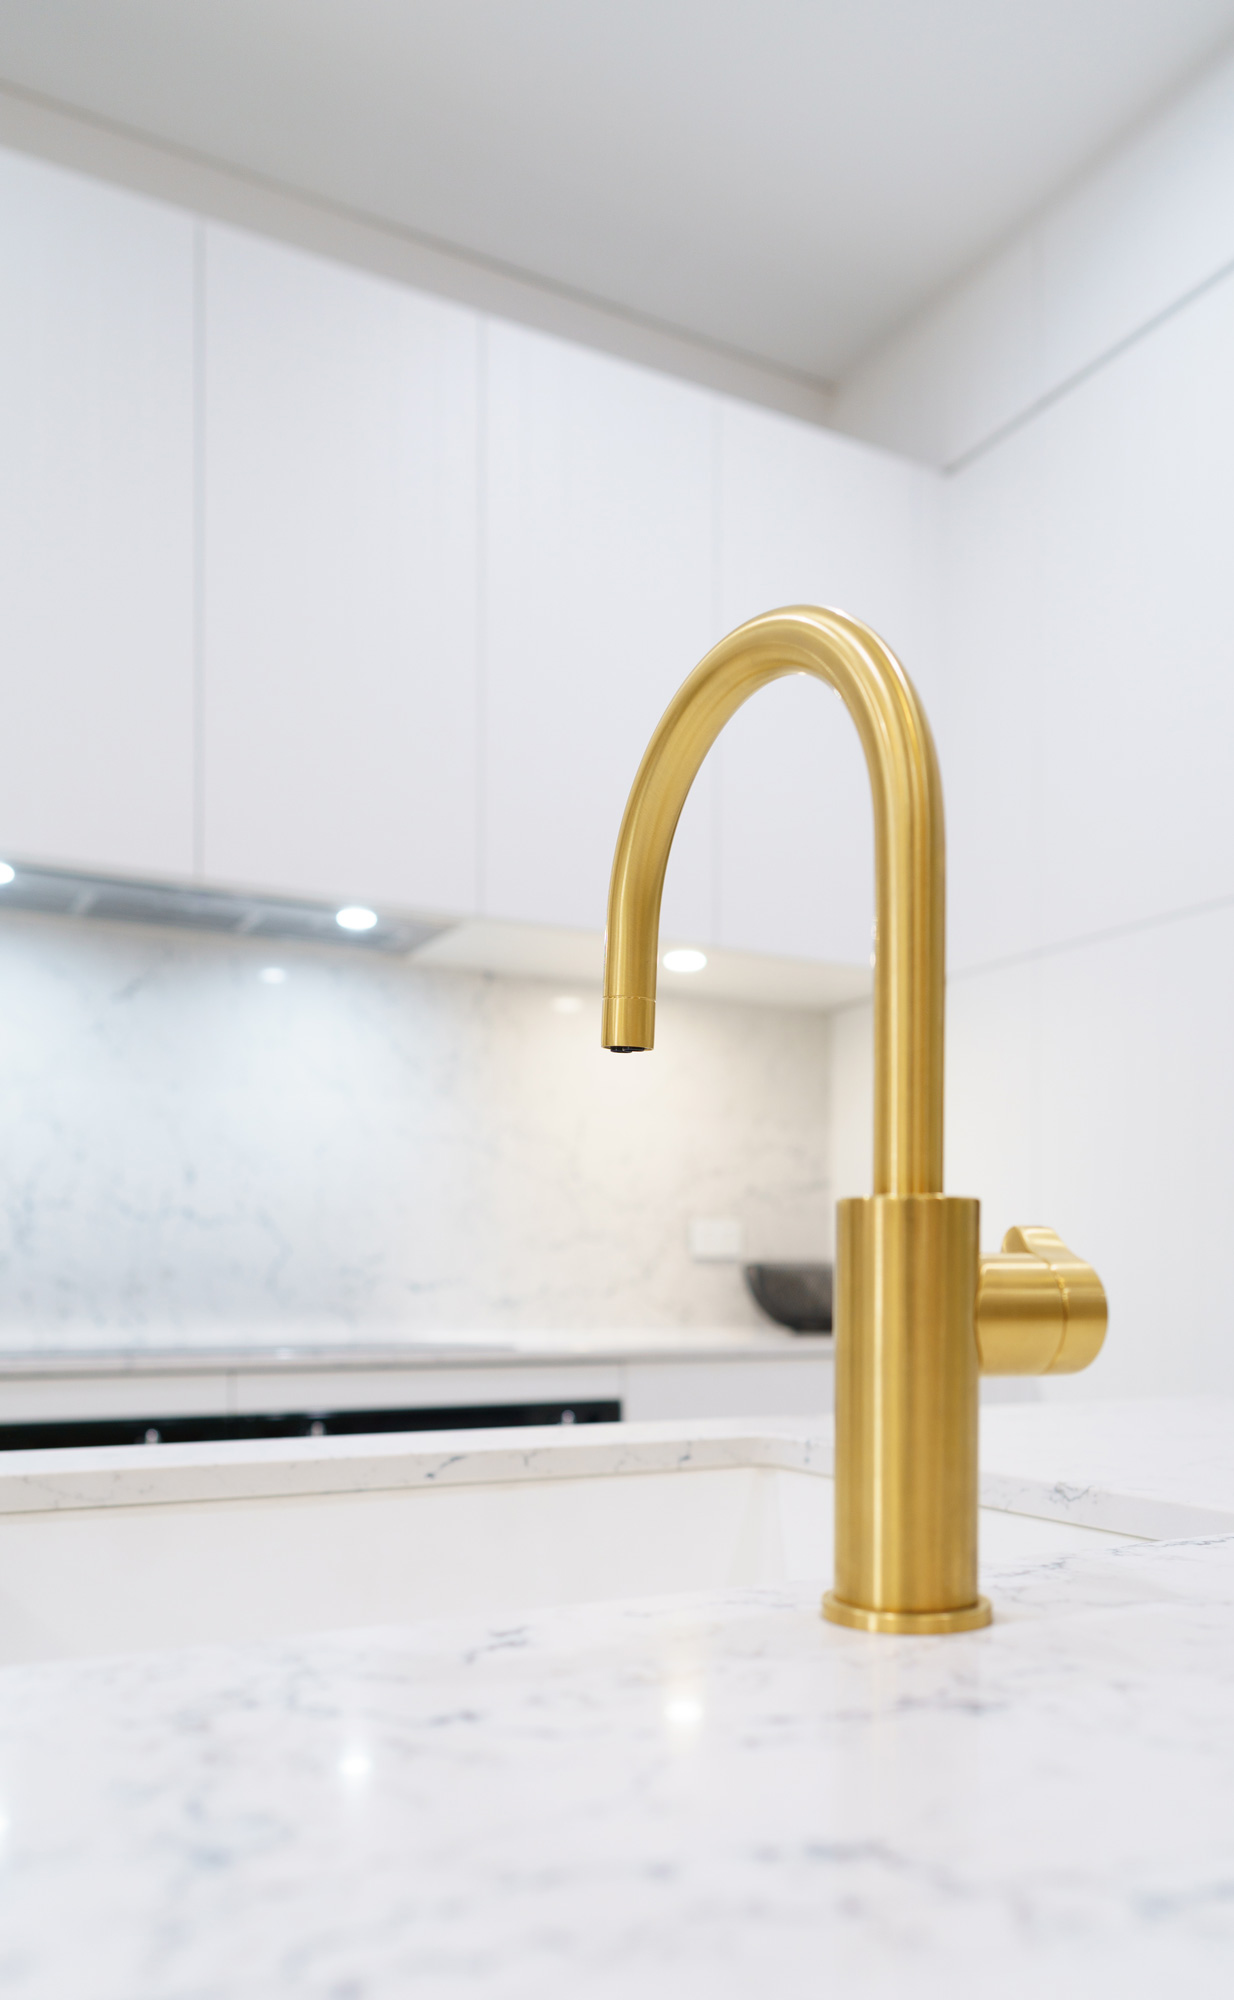 Vilo pull out mixer in bright gold